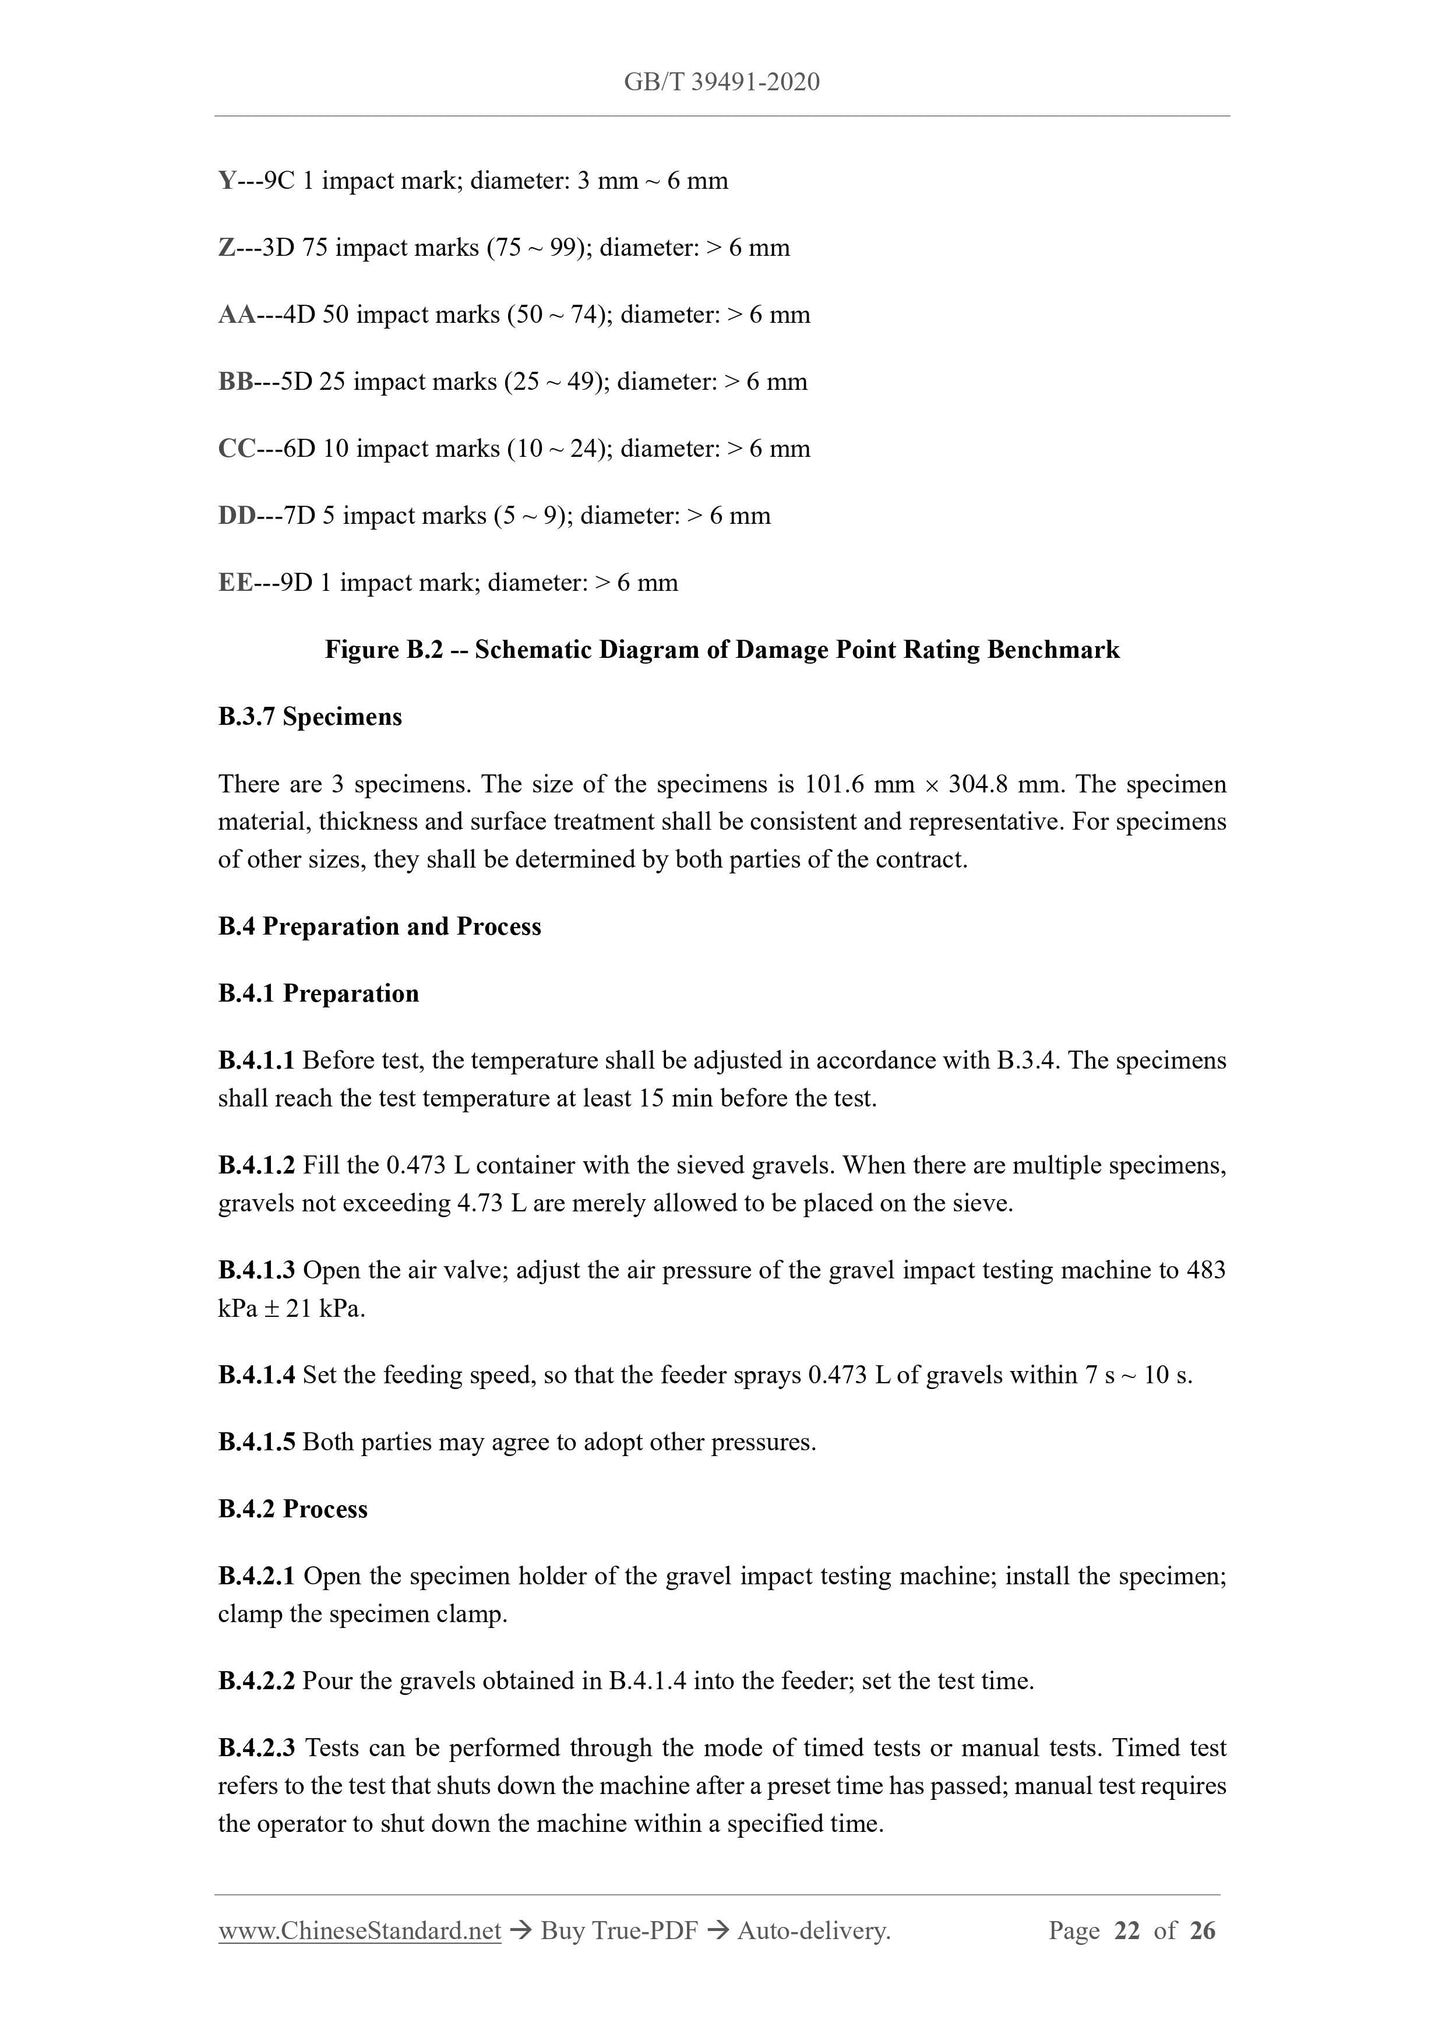 GB/T 39491-2020 Page 11